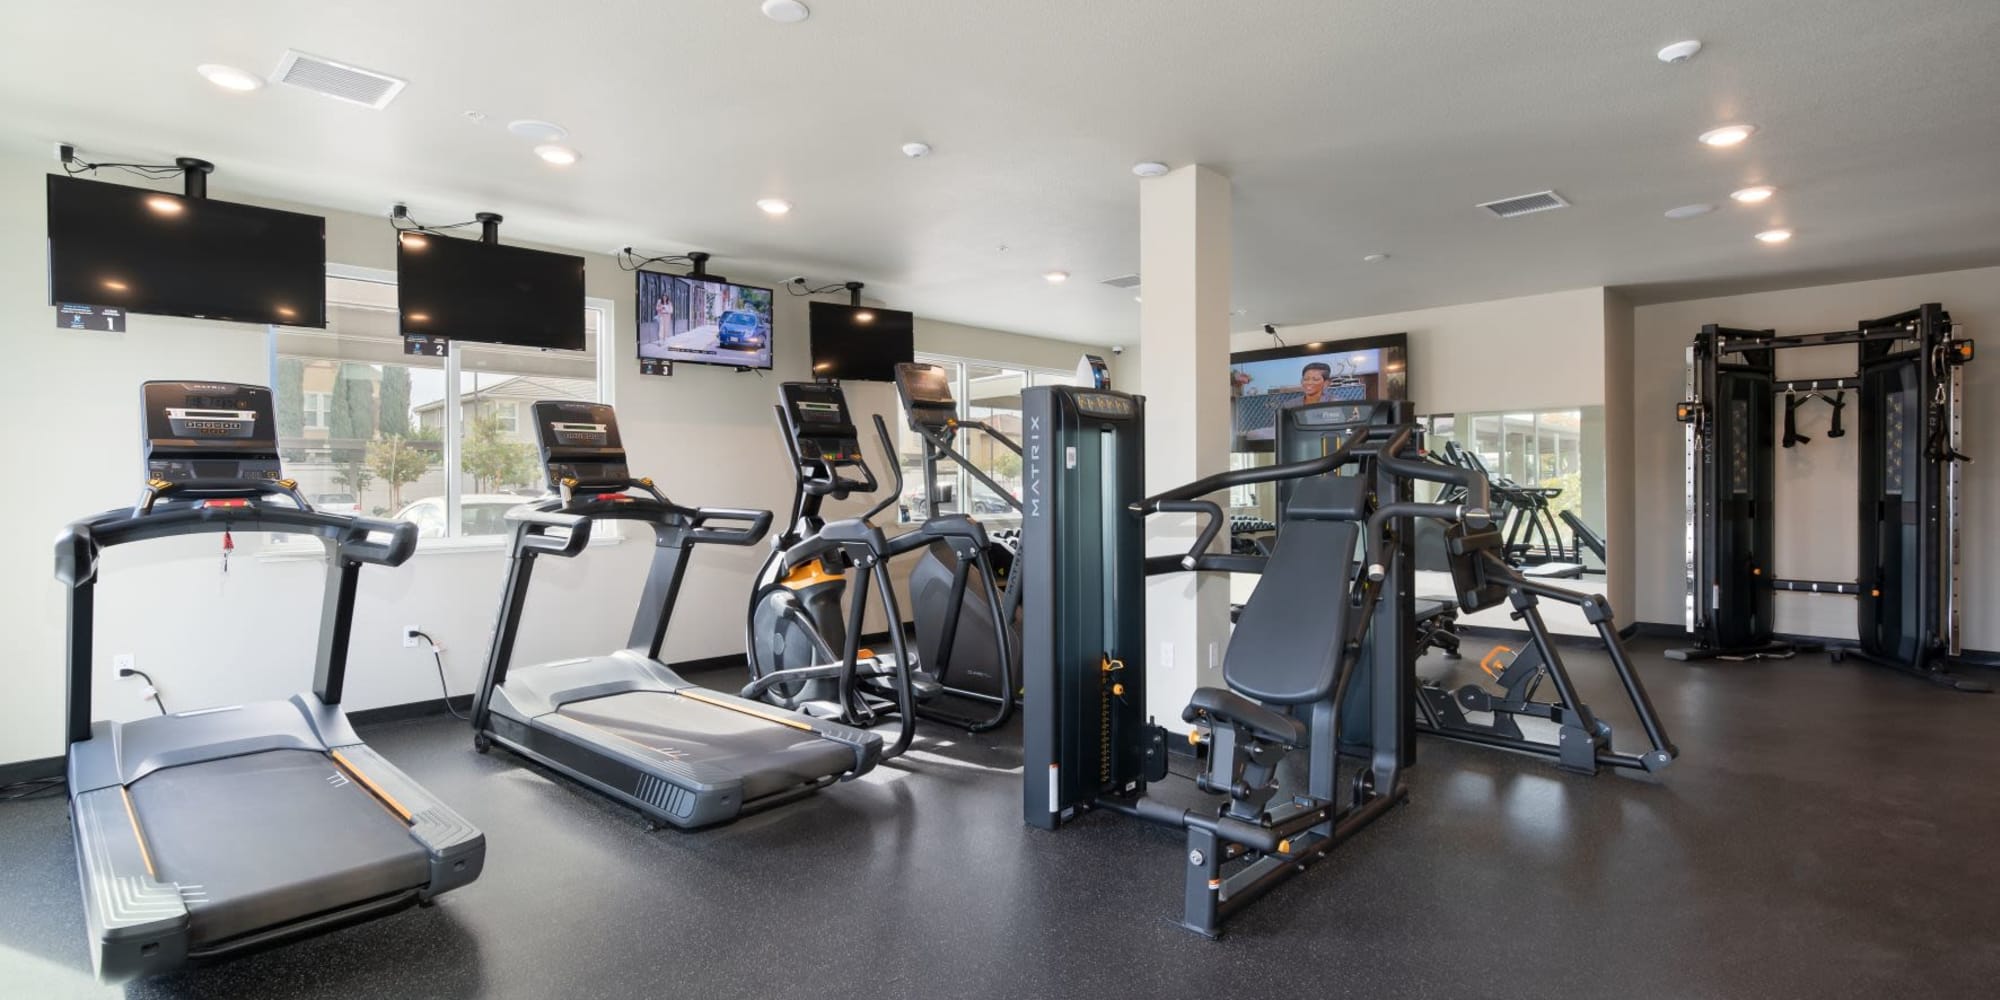 Treadmills in the fitness center at Towne Centre Apartments in Lathrop, California